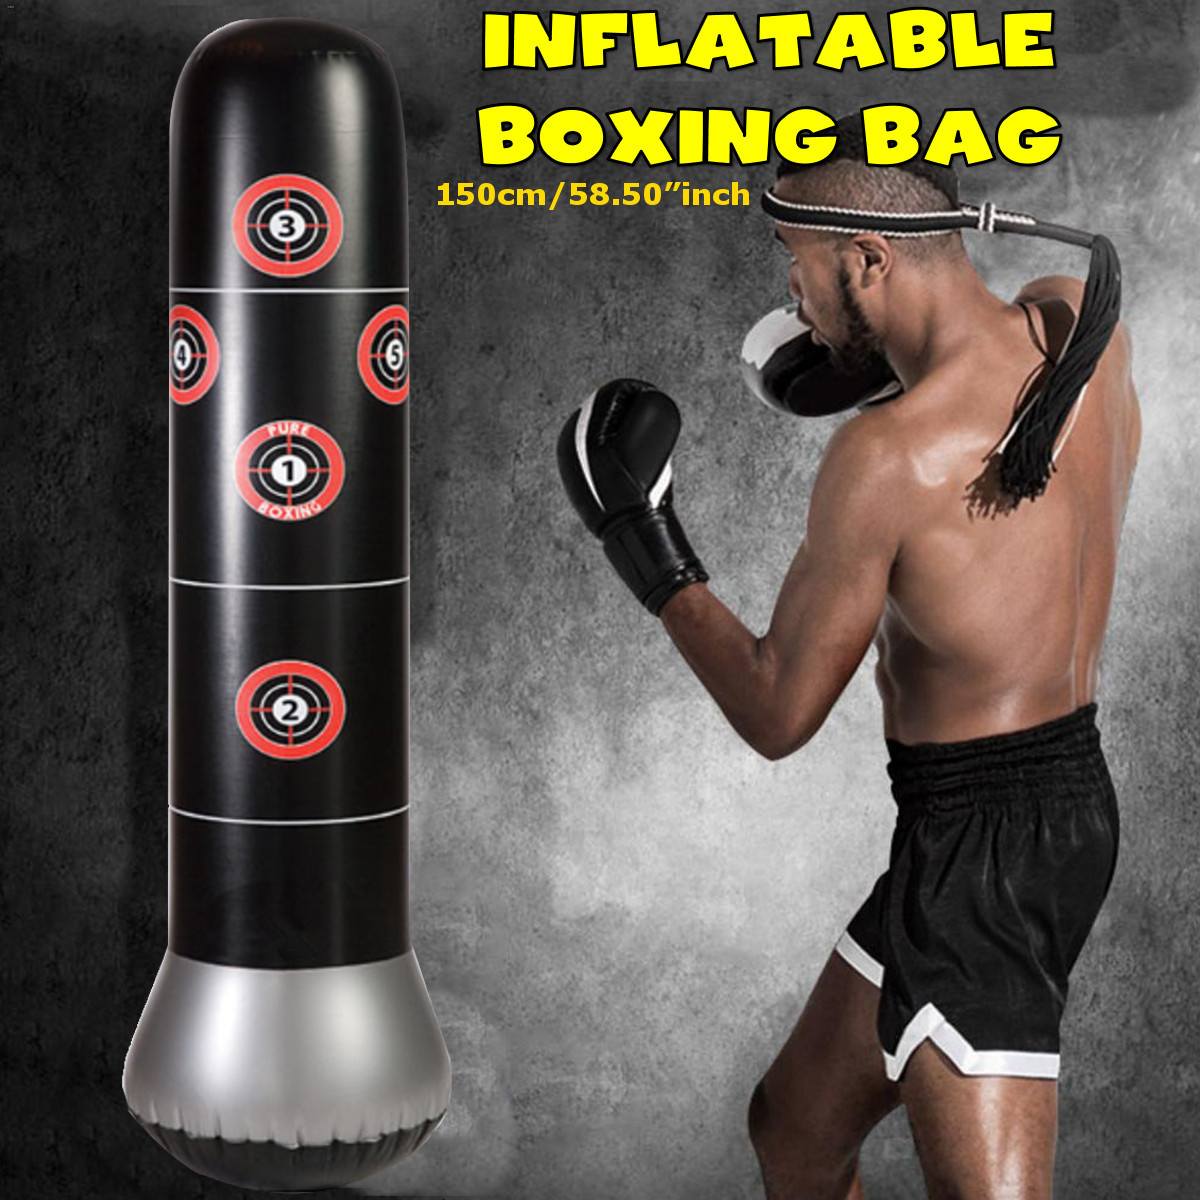 1.5m New Inflatable Stress Punching Tower Bag Boxing Standing Water Base Training Pressure Relief Bounce Back Sandbag With Pump